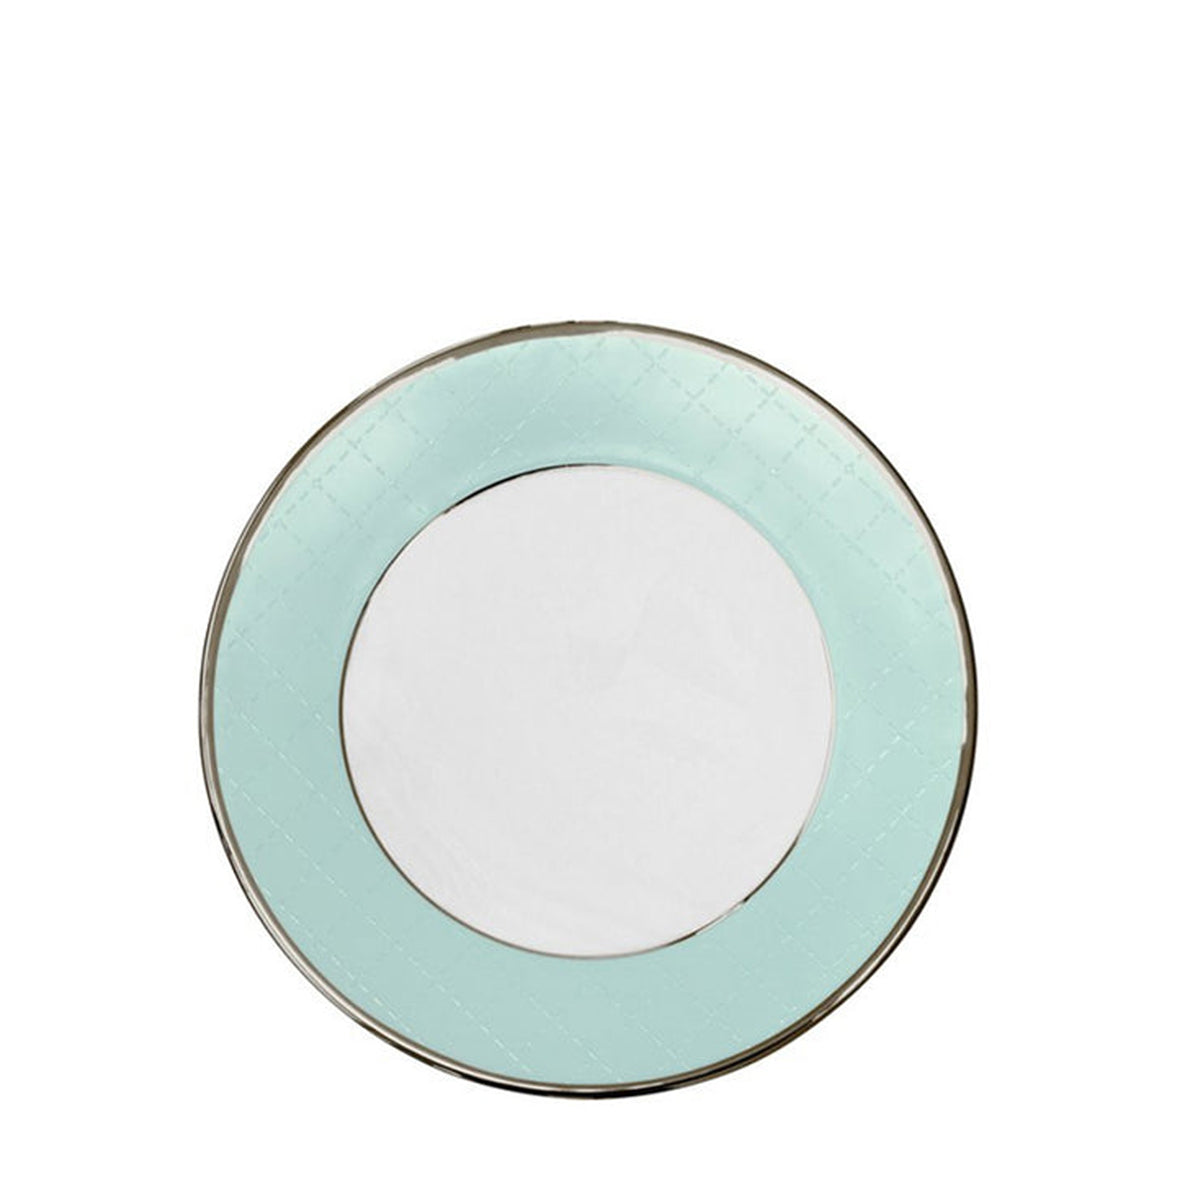 ETHEREAL BLUE SOUP PLATE 22CM